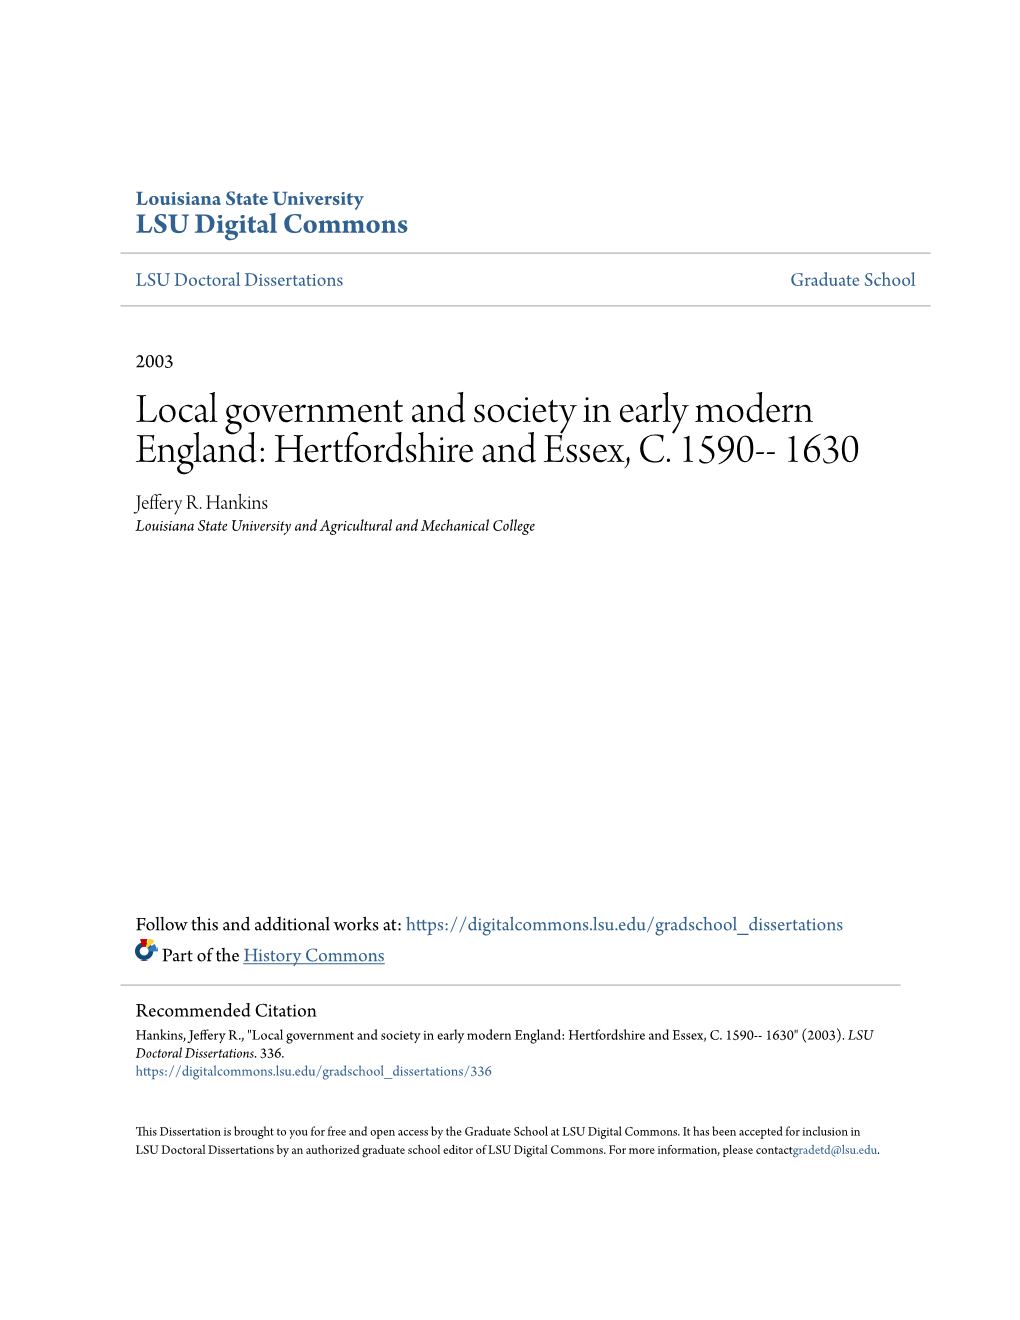 Local Government and Society in Early Modern England: Hertfordshire and Essex, C